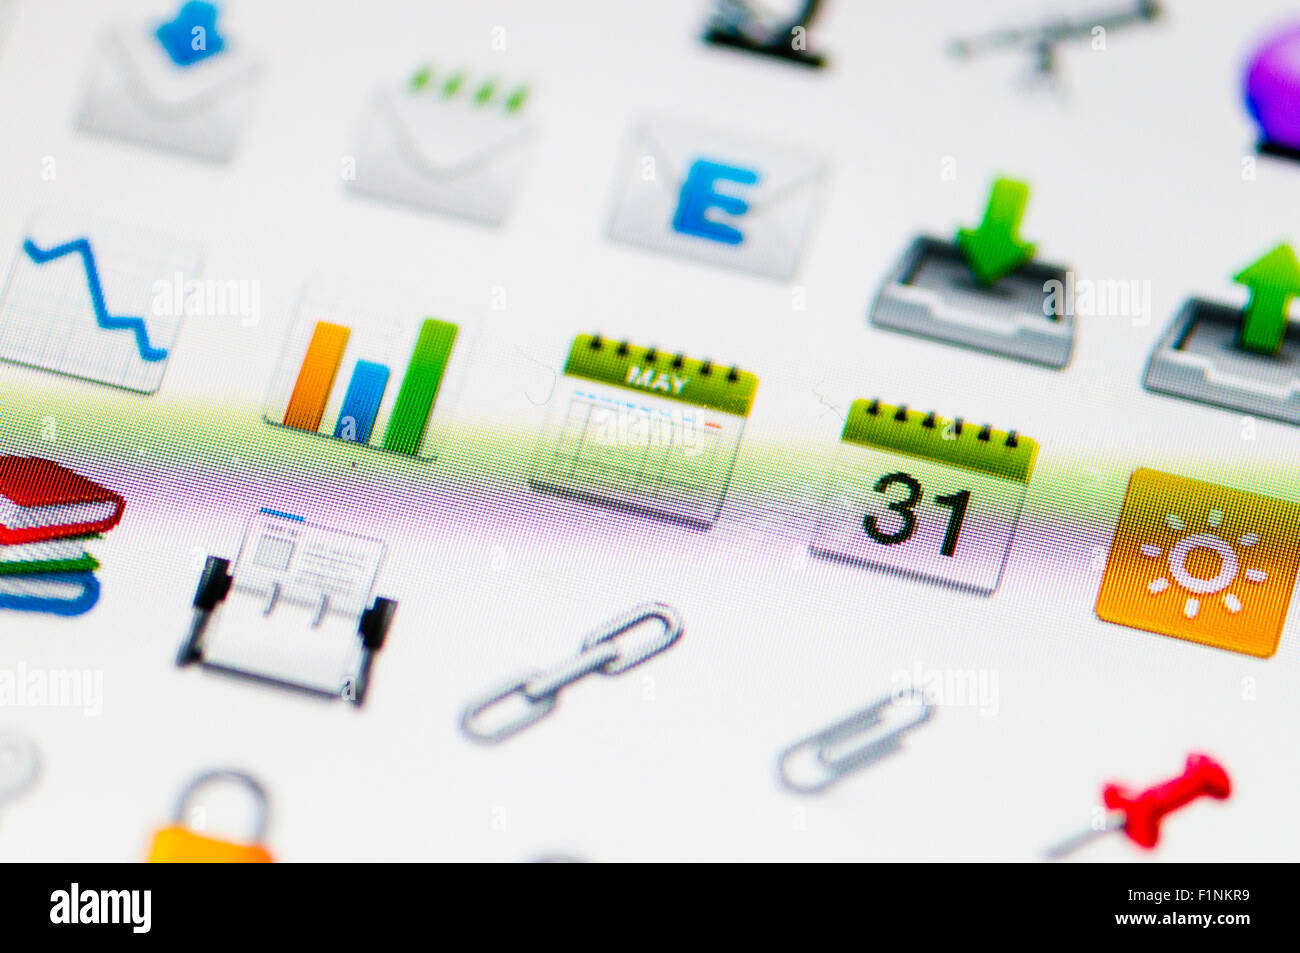 Screen displaying a range of business and office emojis Stock Photo